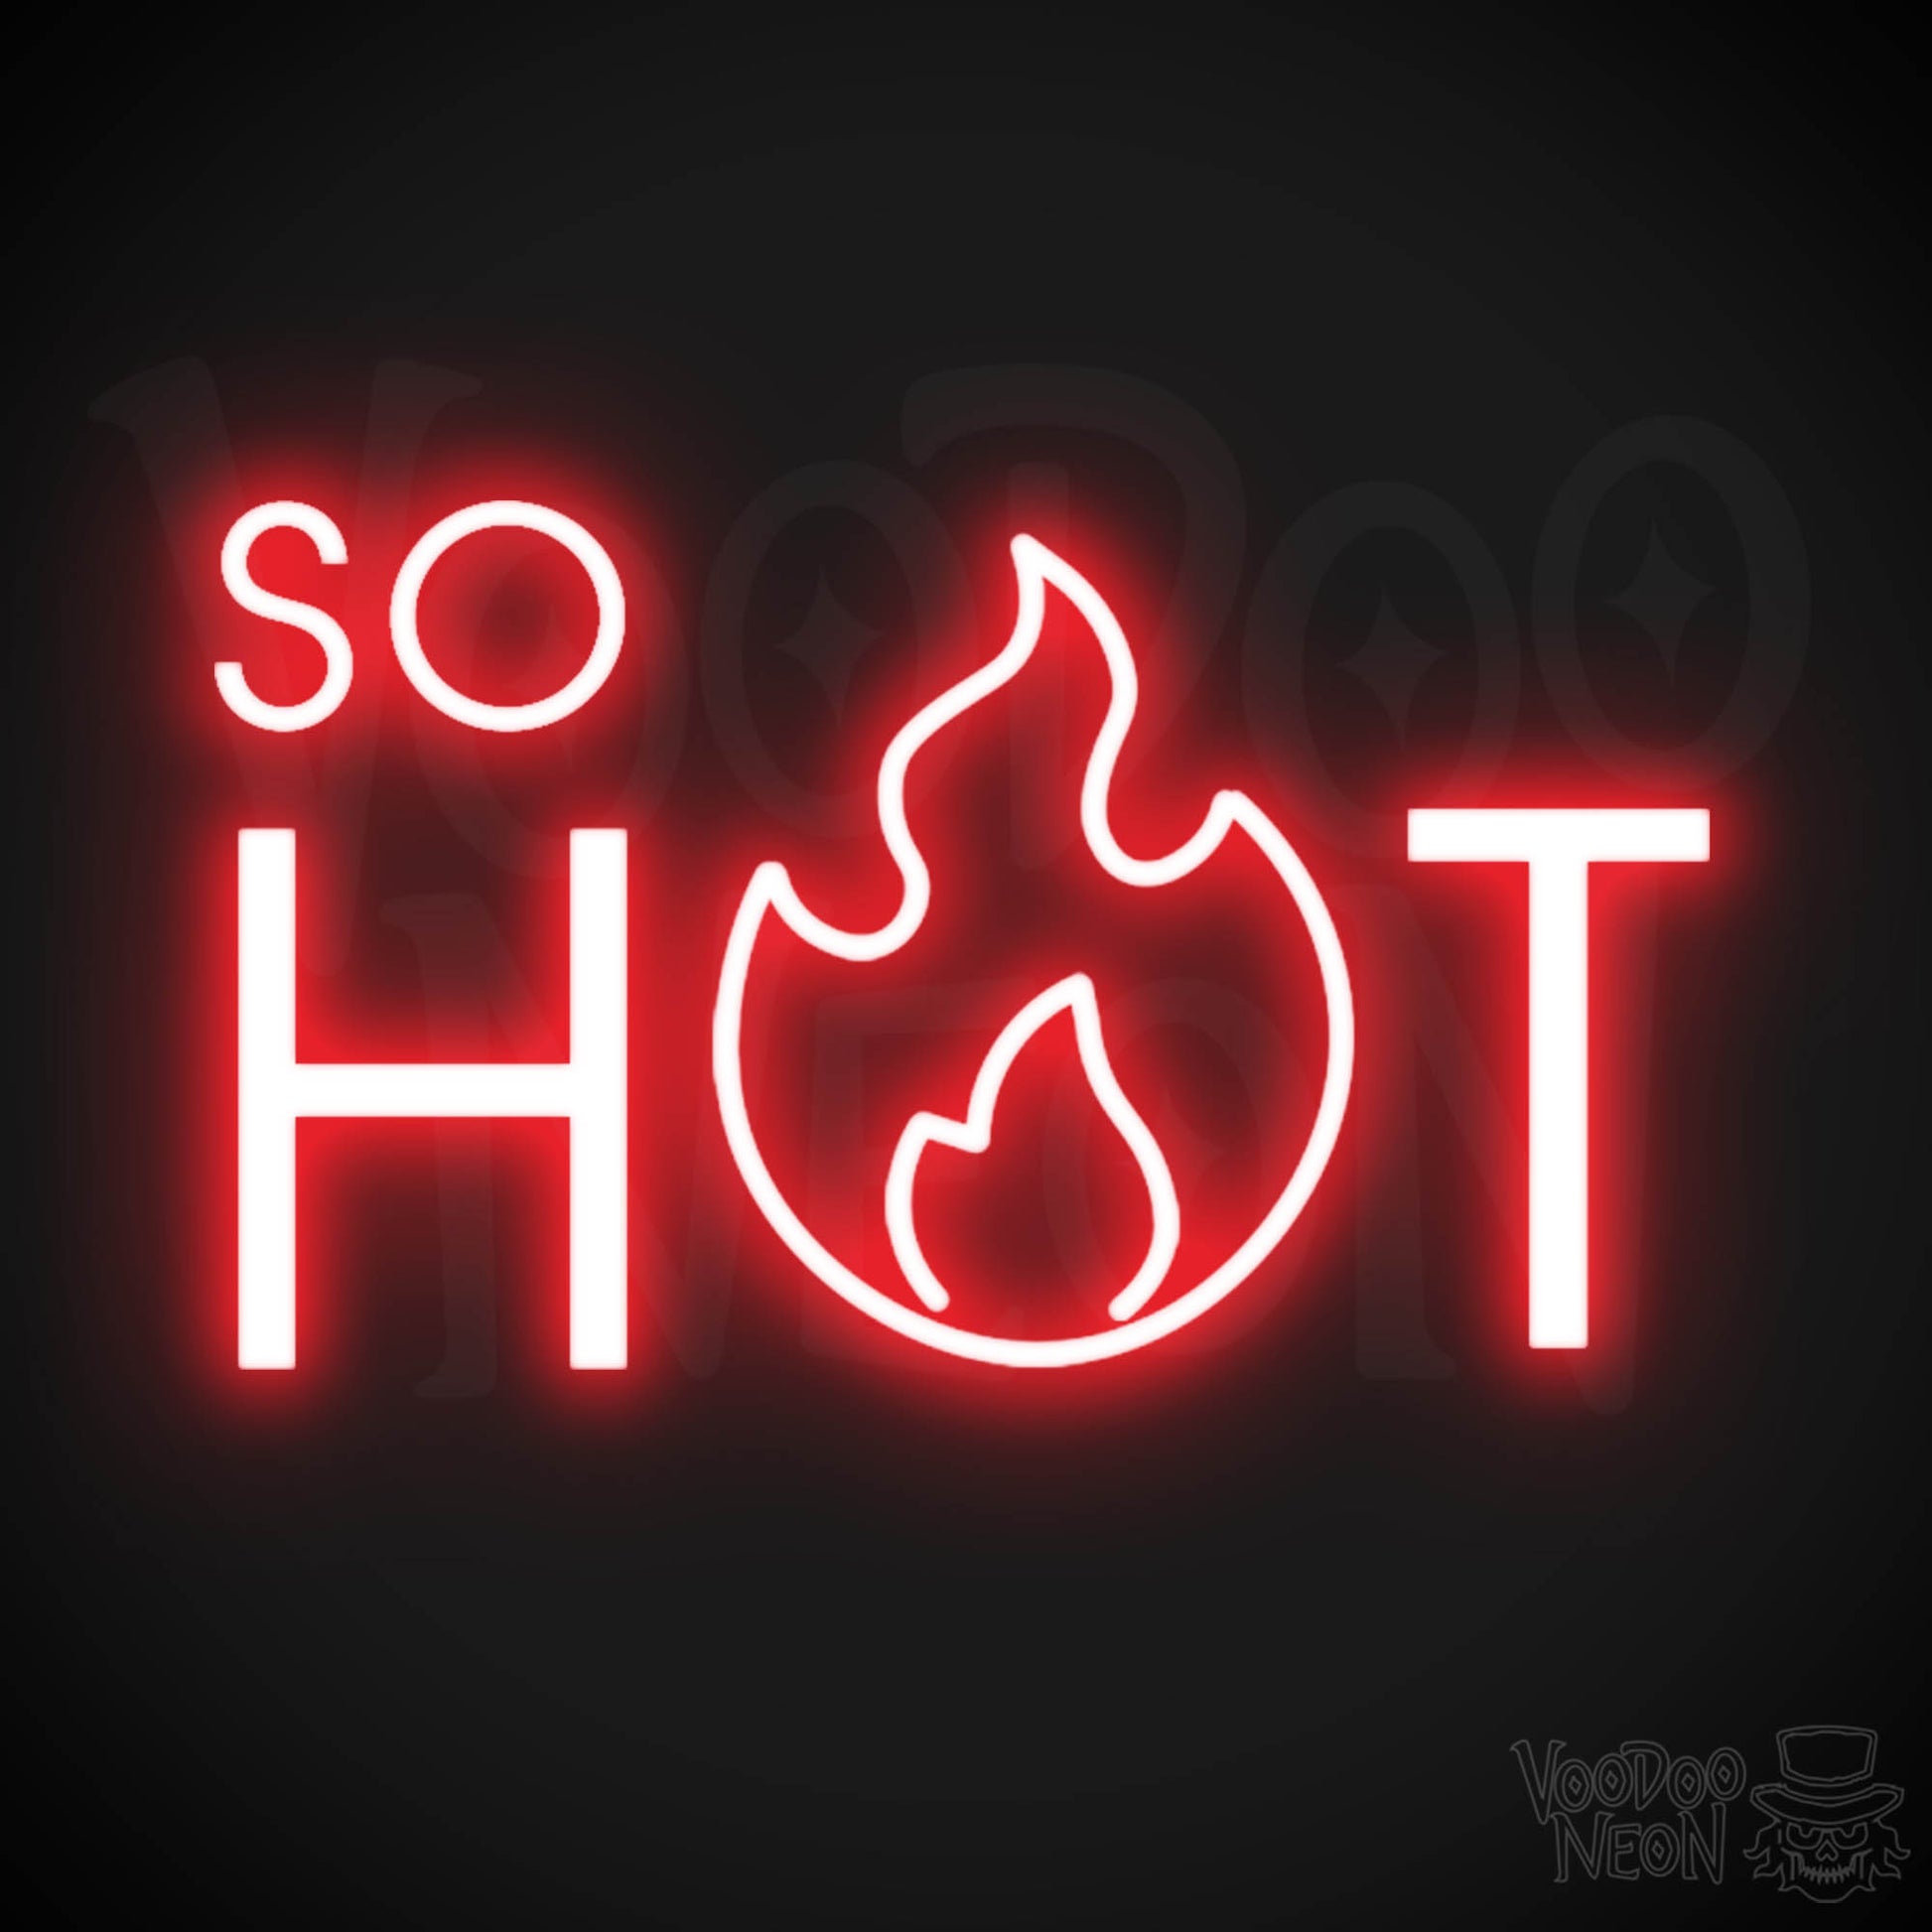 So Hot Neon Sign - Neon So Hot Sign - LED Neon Wall Art - Color Red